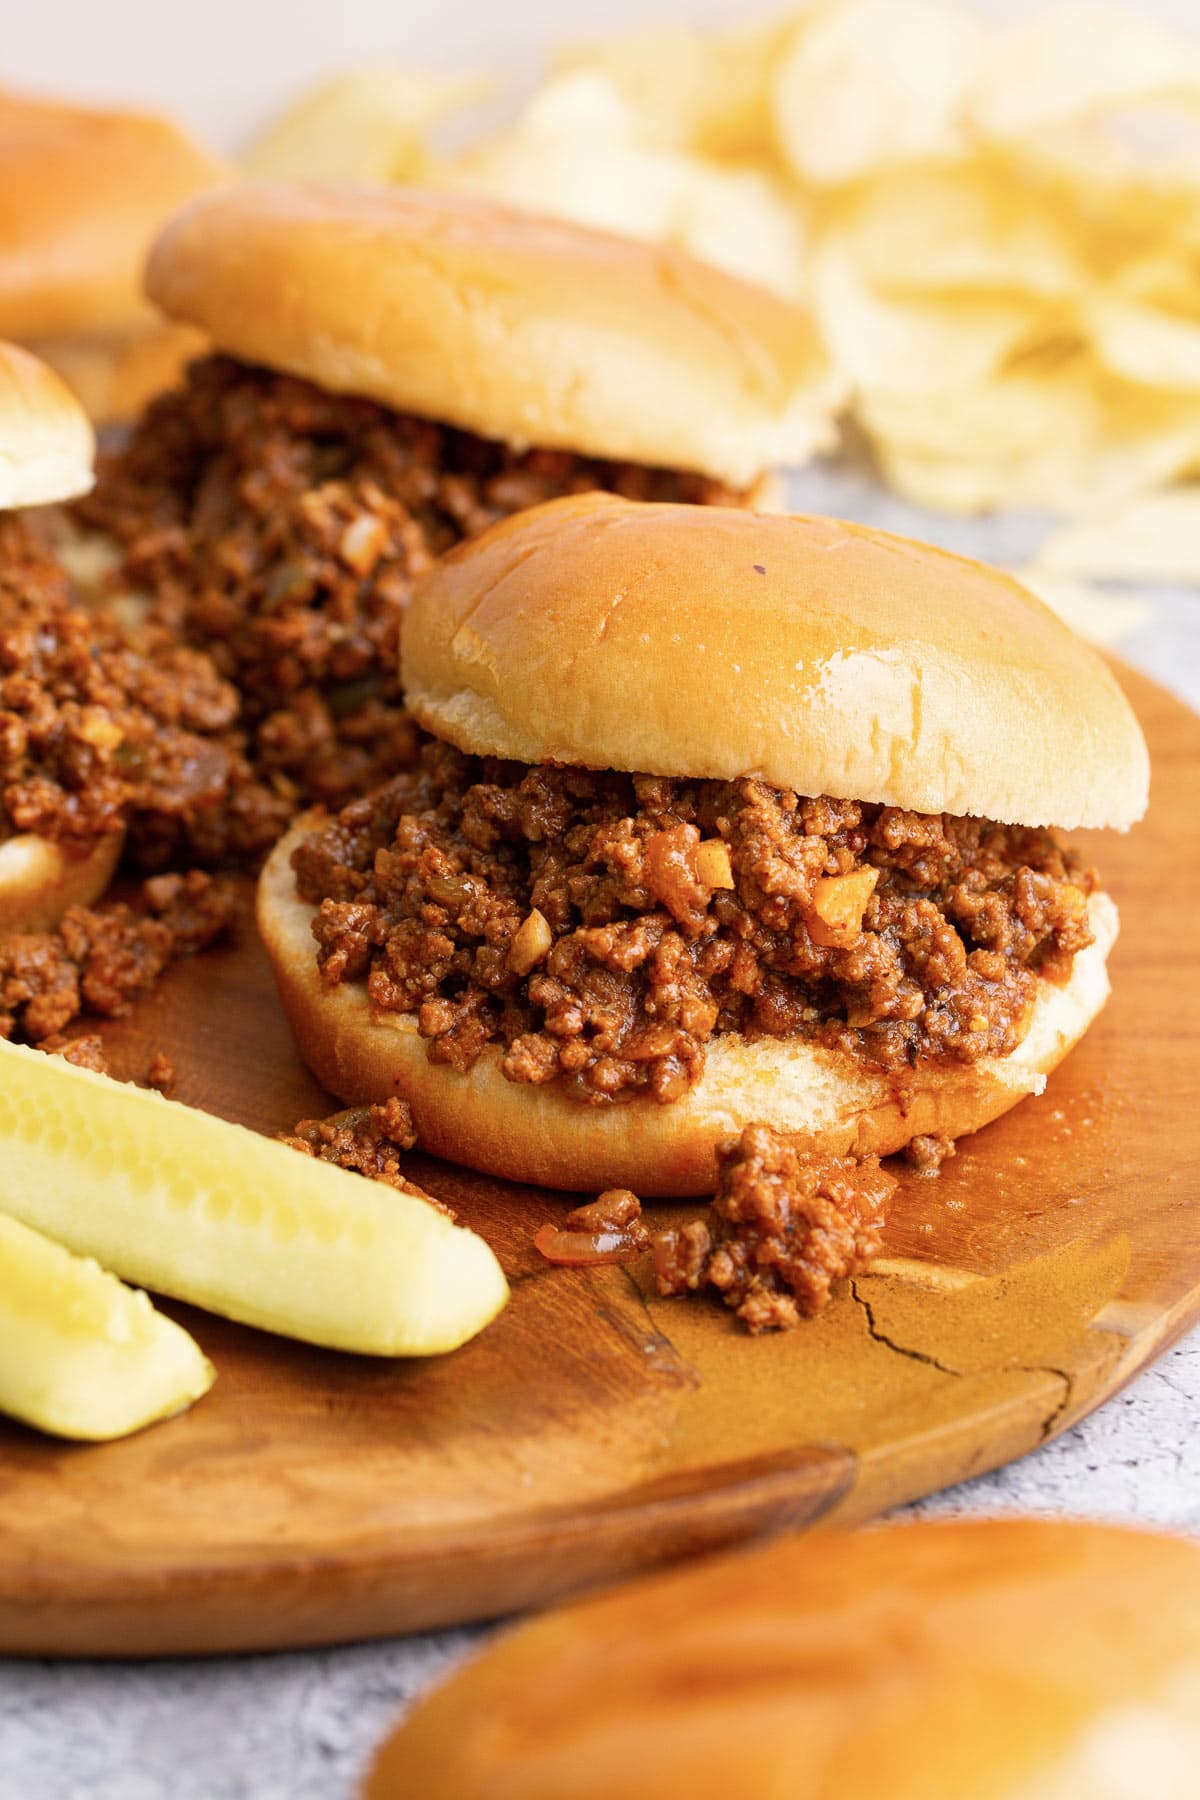 Several homemade Sloppy Joes sandwiches with pickle spears and potato chips on a wooden serving board.